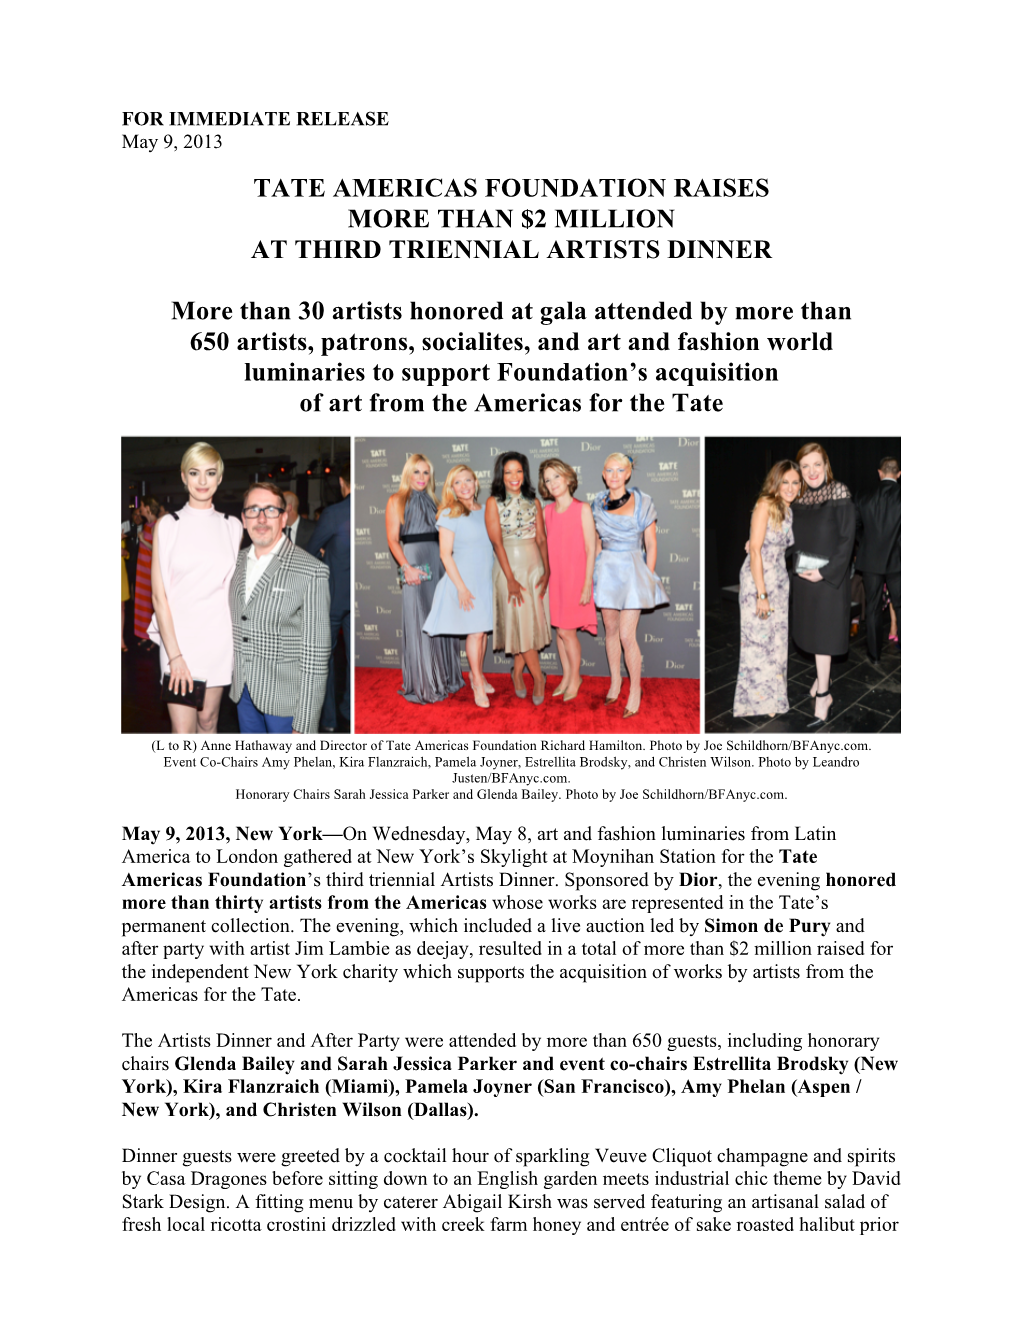 TATE AMERICAS FOUNDATION RAISES MORE THAN $2 MILLION at THIRD TRIENNIAL ARTISTS DINNER More Than 30 Artists Honored at Gala At